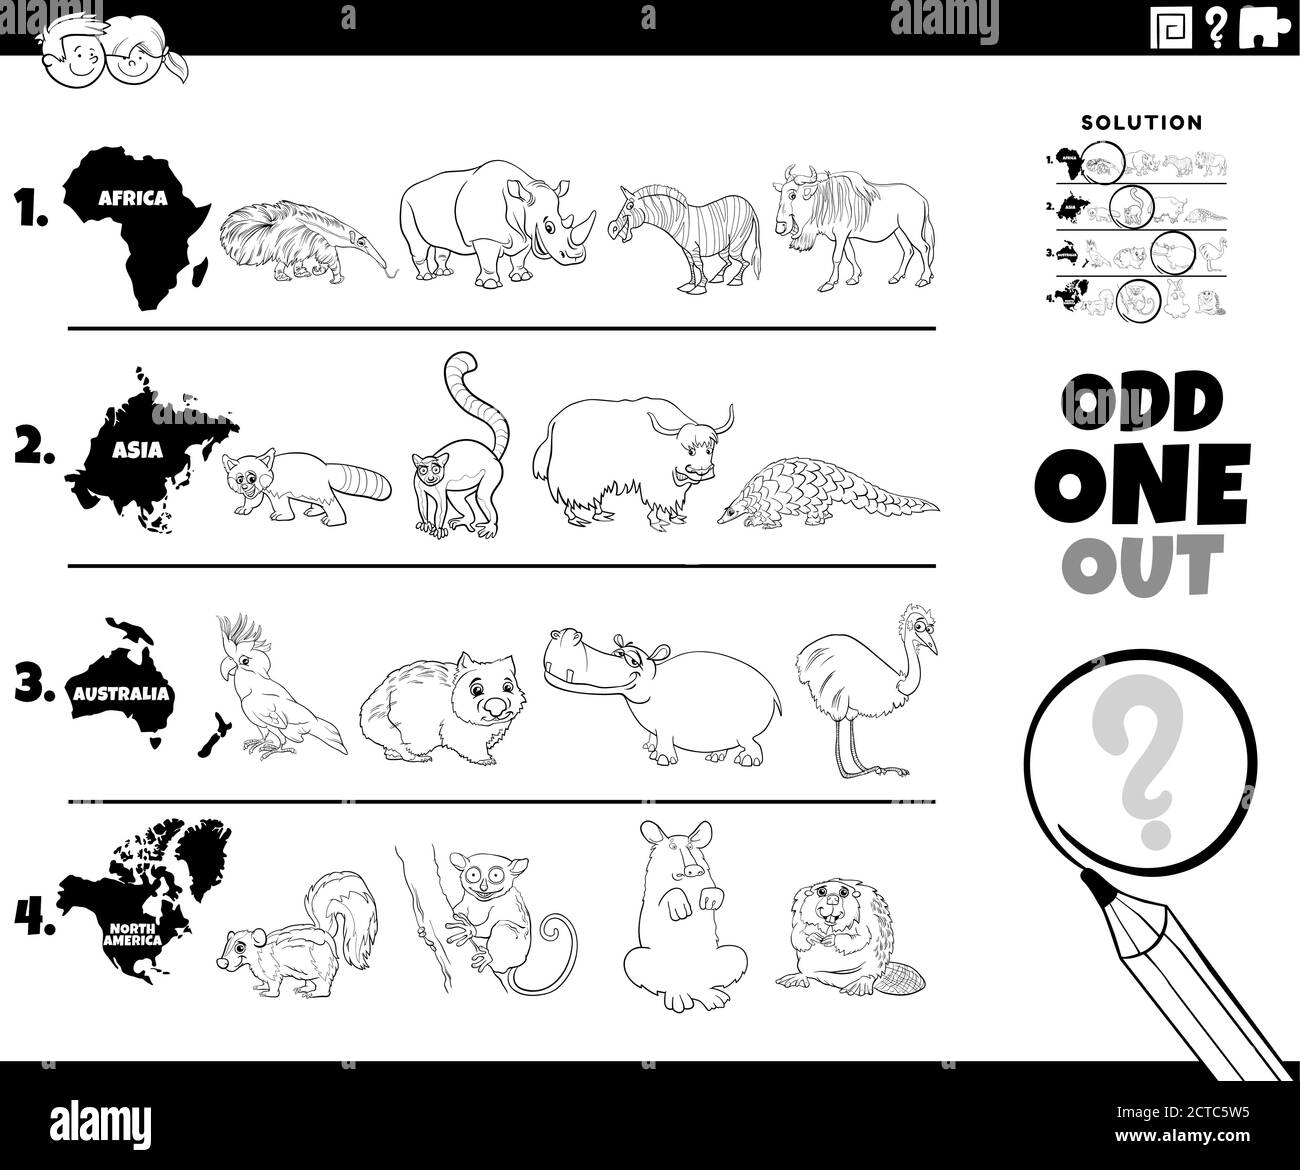 Black and White Cartoon Illustration of Odd One Oute Picture in a Row Educational Game for Elementary Age or Preschool Children with Animals from diff Stock Vector